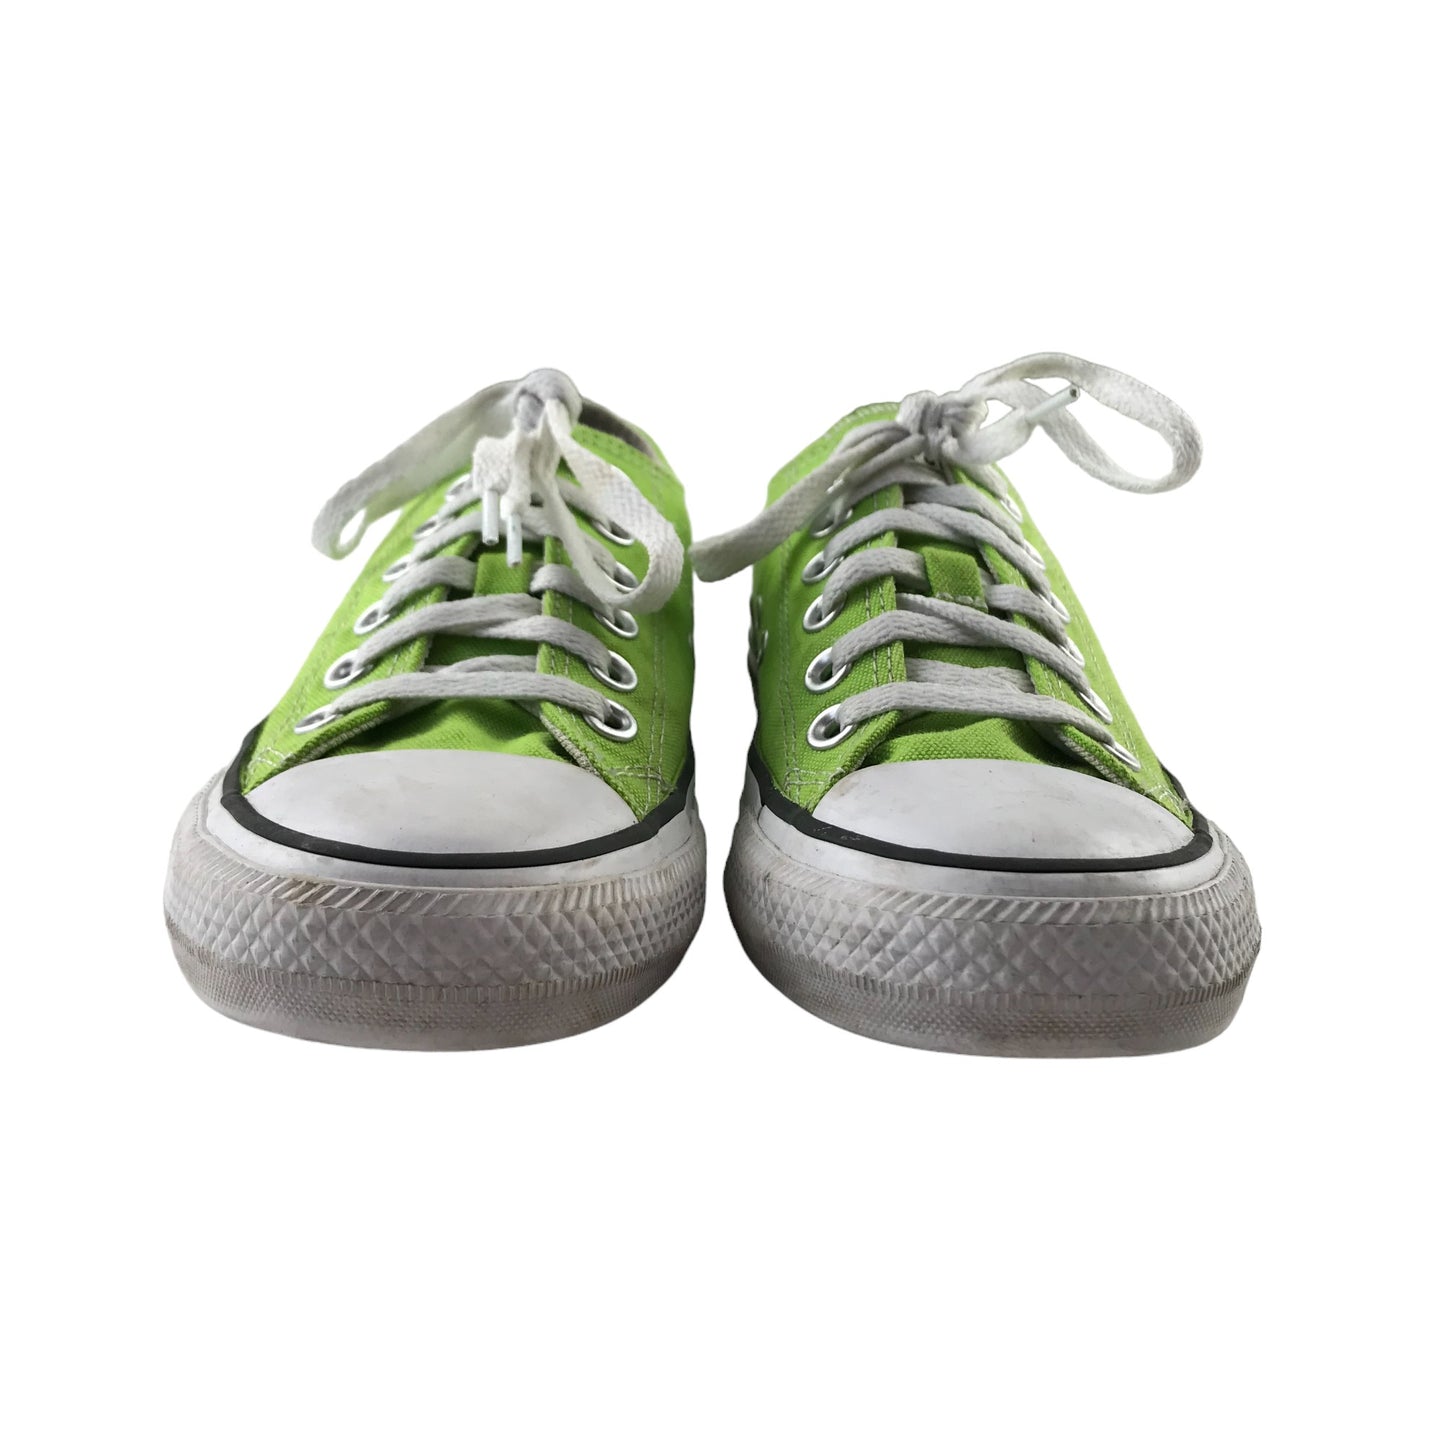 Converse Trainers Shoe Size 4.5 Lime Green All Star Chuck Taylor Low Top